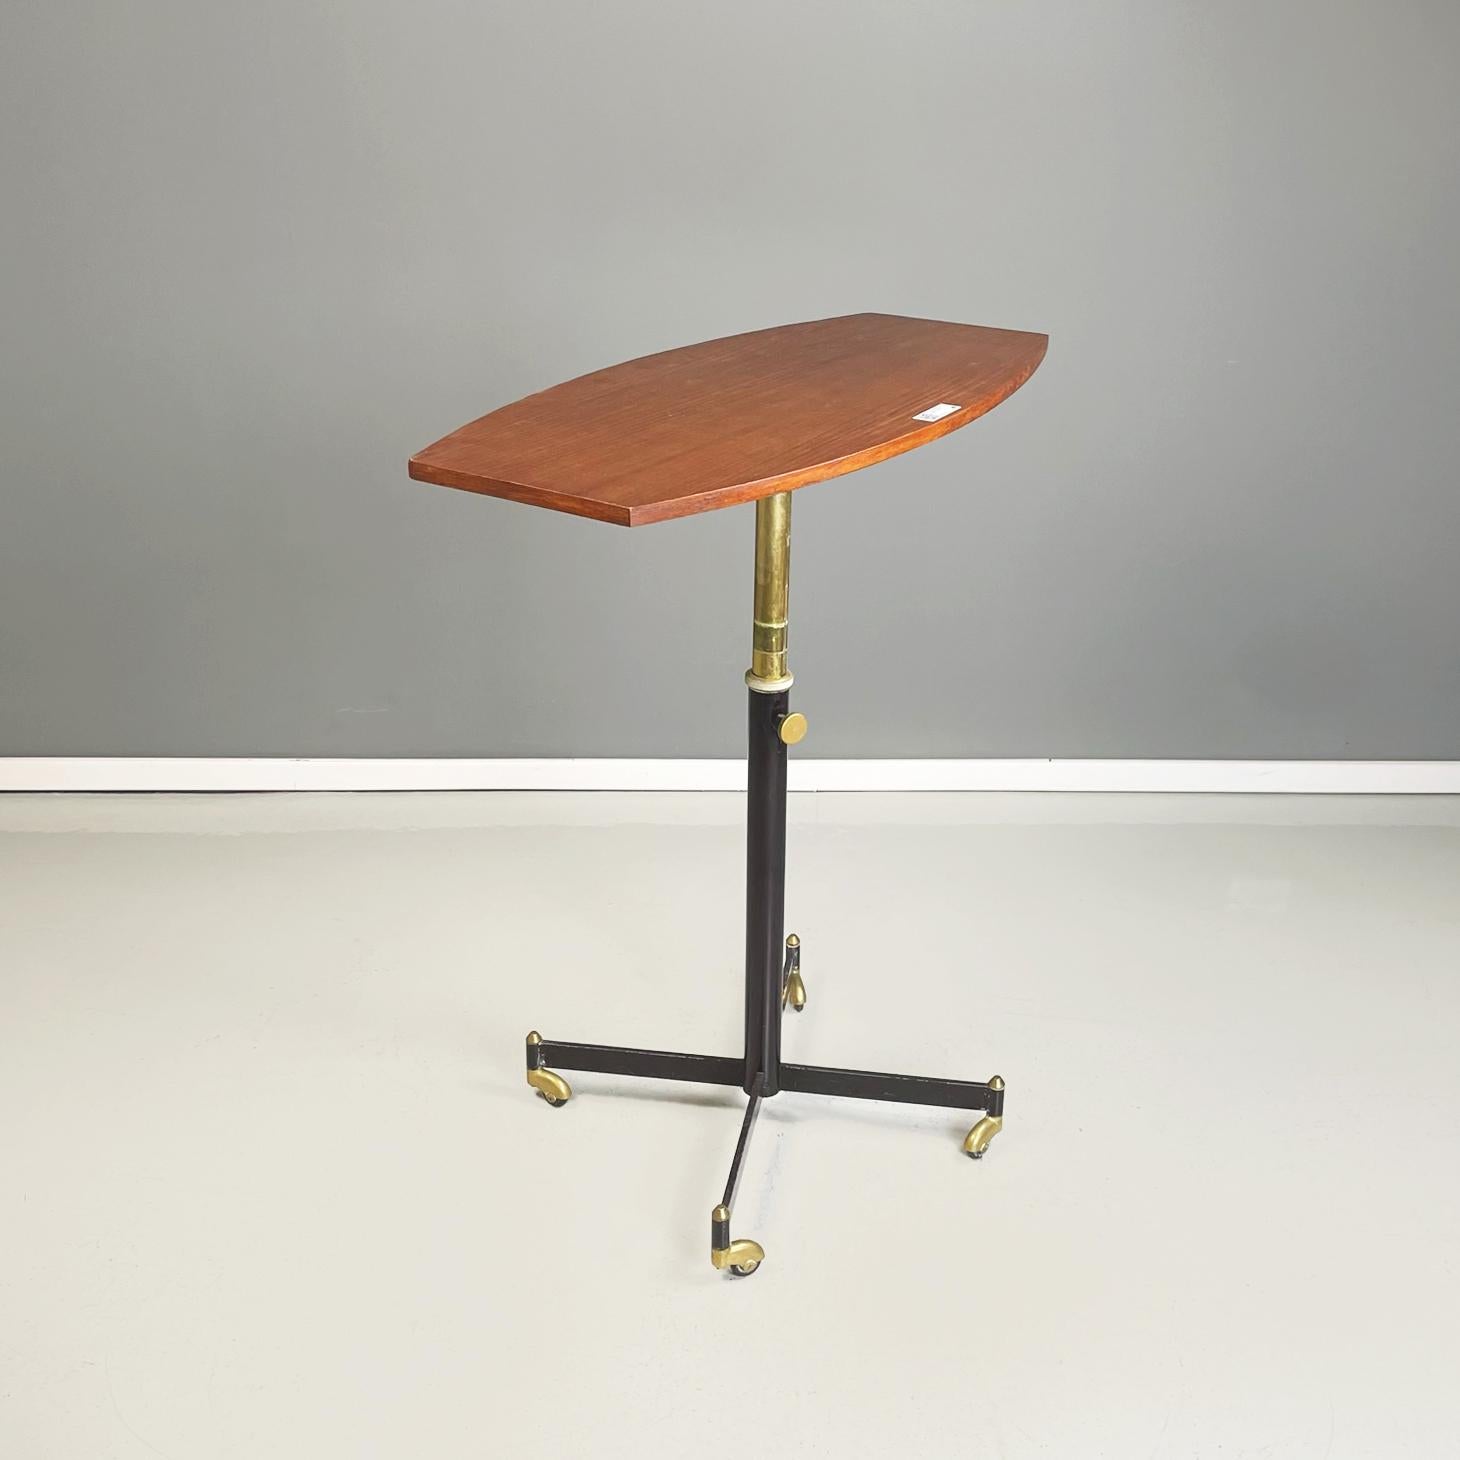 Italian midcentury table with adjustable wooden top withe metal and brass 1950s.
Table with adjustable wooden top and black painted metal and brass structure. 4 spokes base on wheels. It can be used as a serving table or side coffee table.
It came